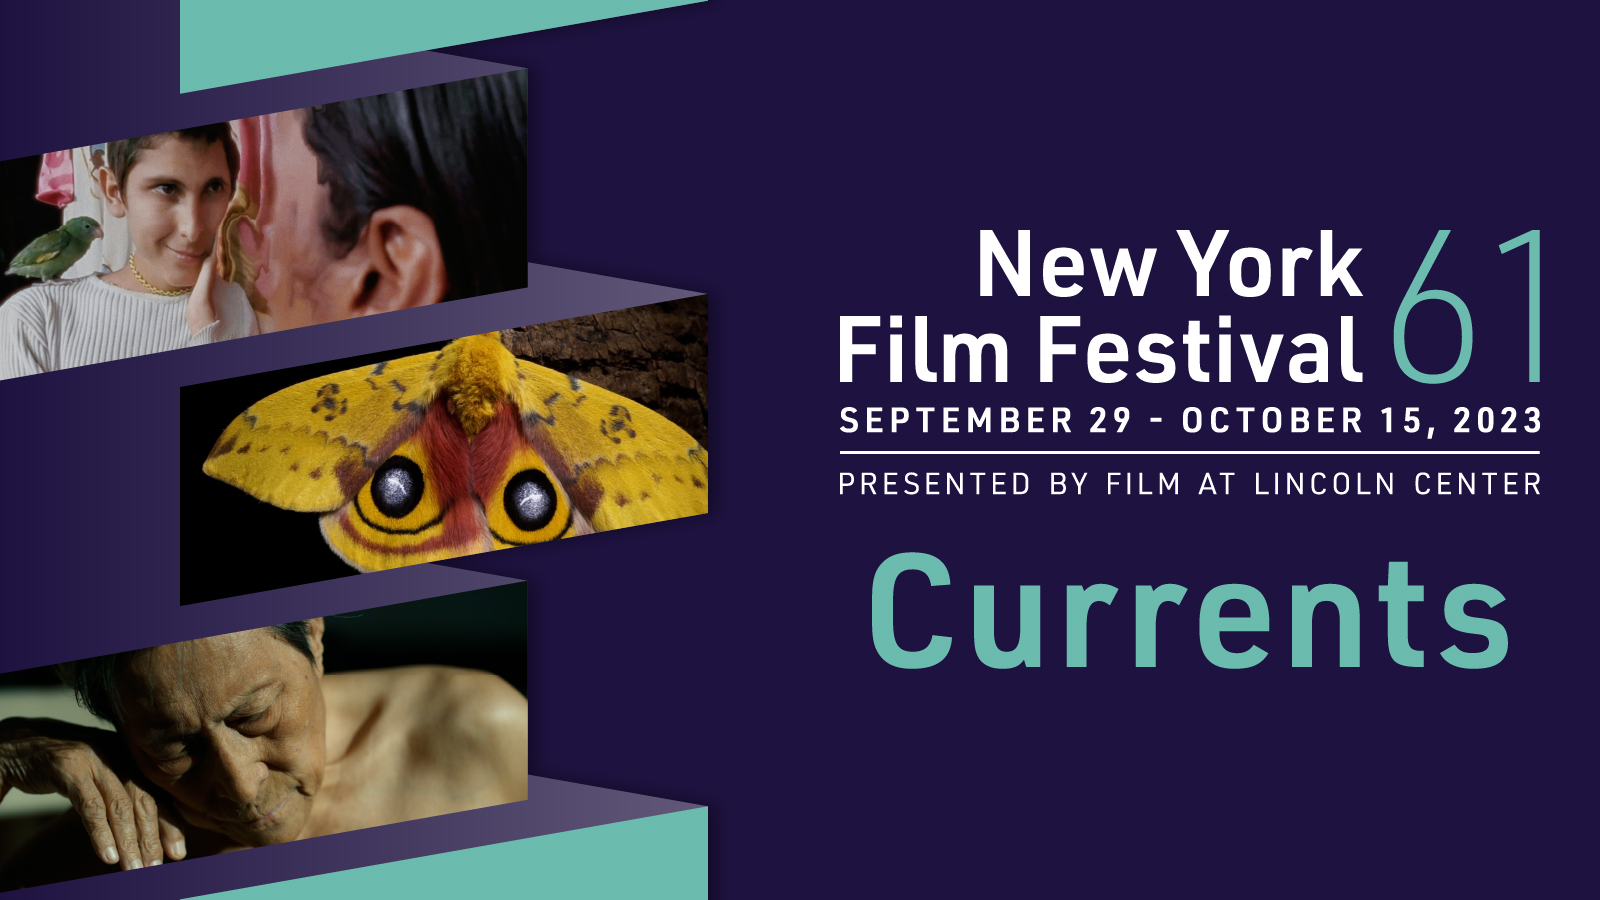 61st New York Film Festival Currents Announced photo image picture